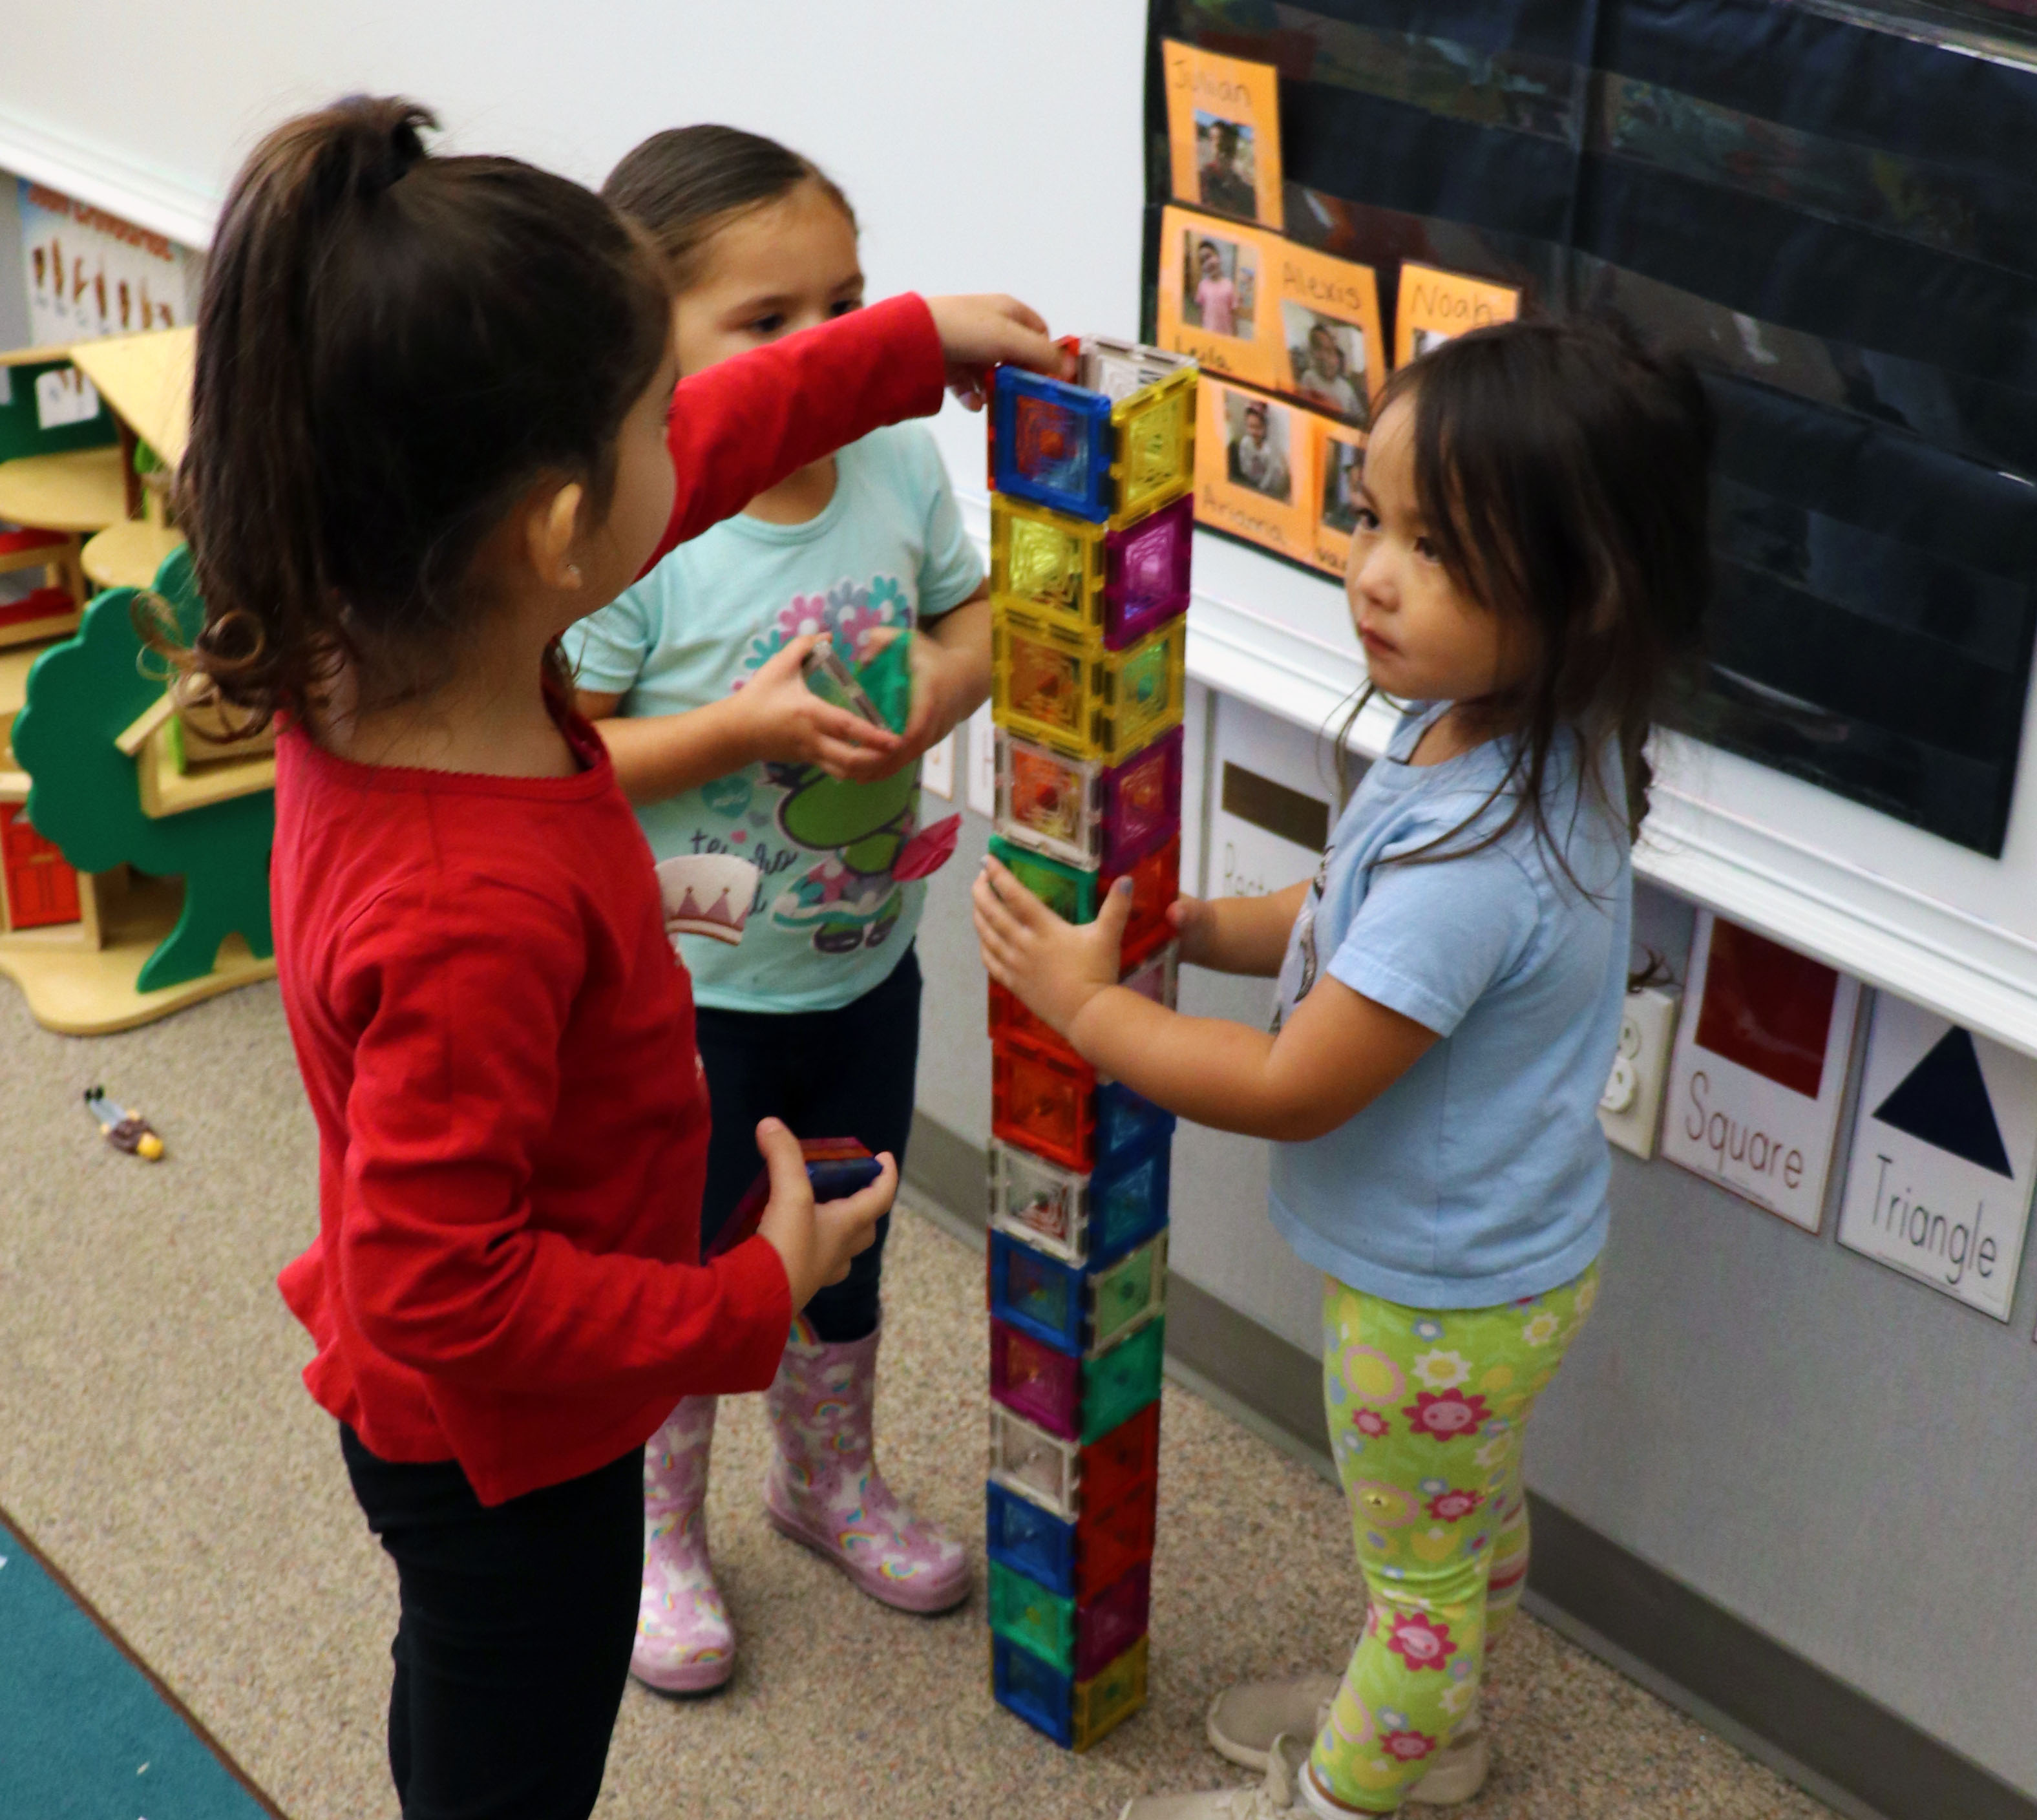 Girls building magnetic tower